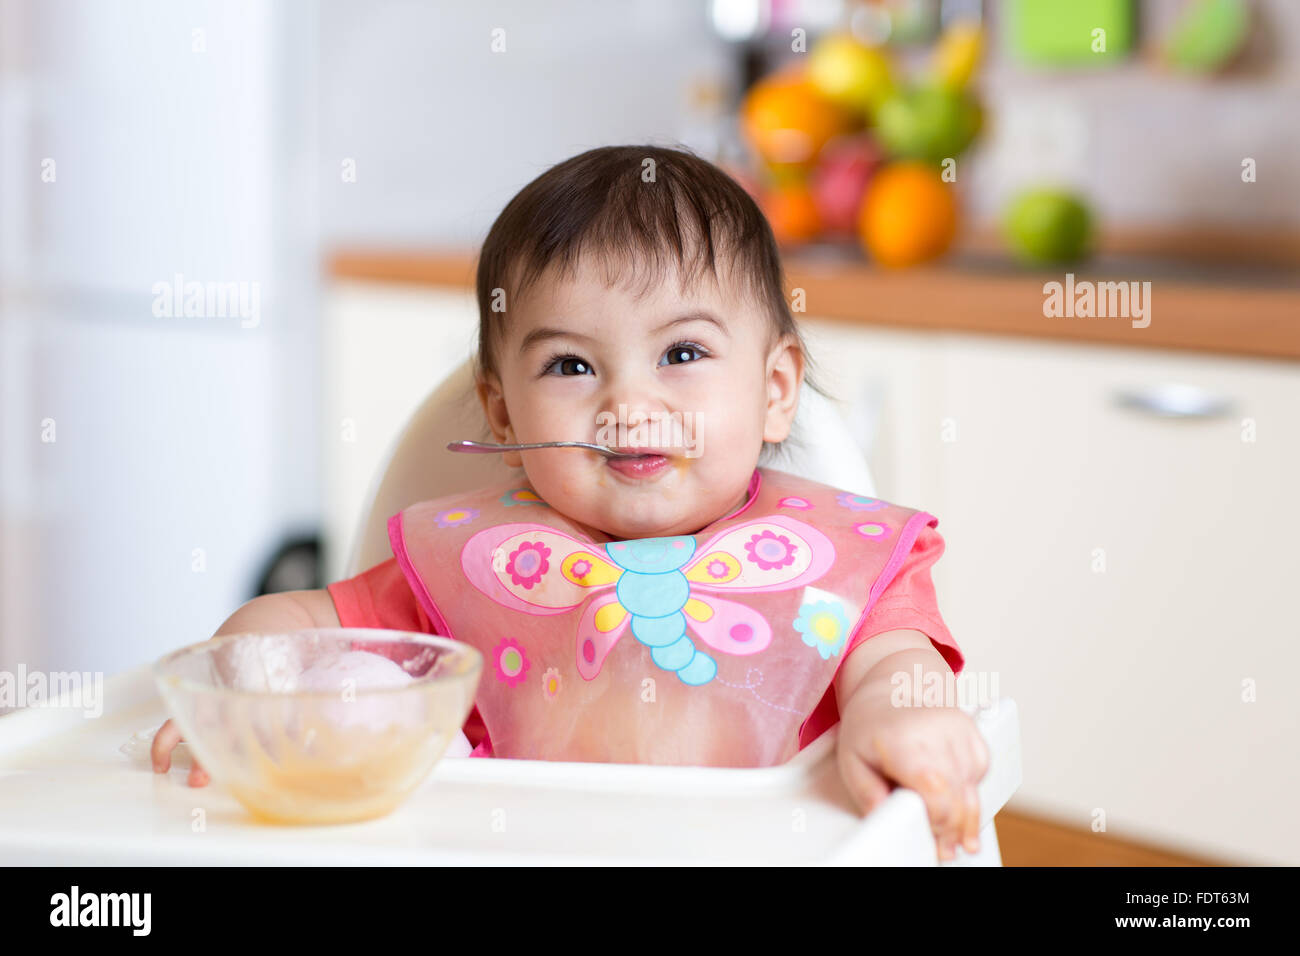 funny baby child eating itself with spoon in kitchen Stock Photo